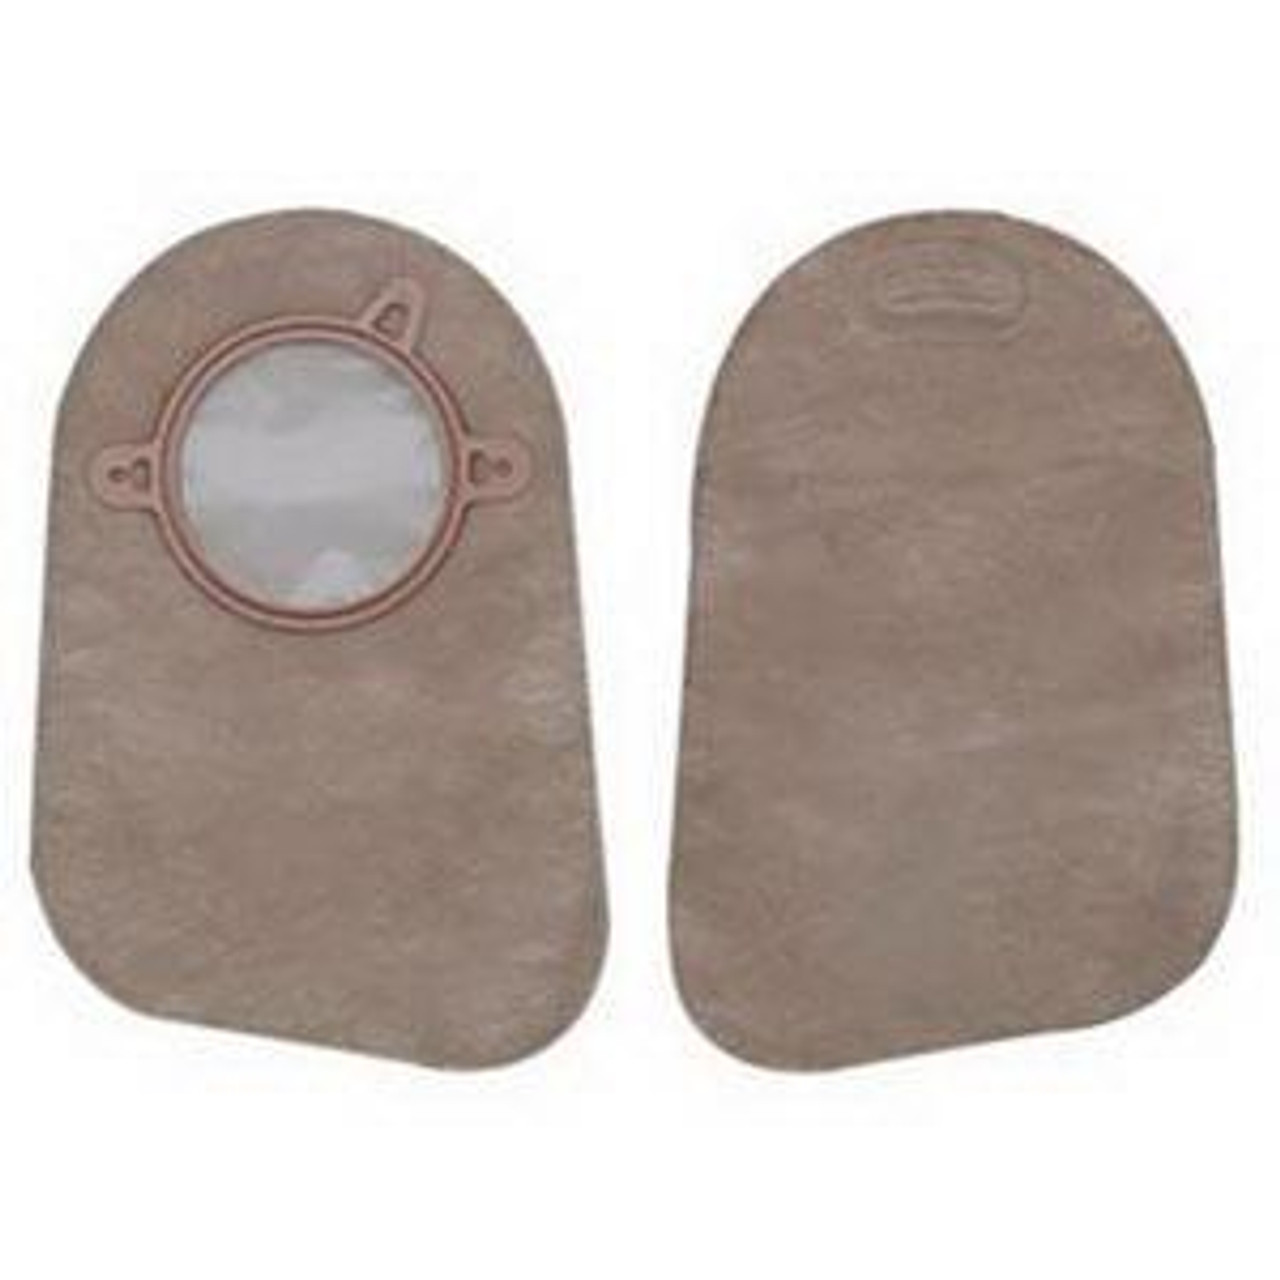 NEW IMAGE CLOSED Pouch, FILTER, 1 3/4" FLANGE, BEIGE, 9" BX/30 (HOL-18372) (Hollister 18372)